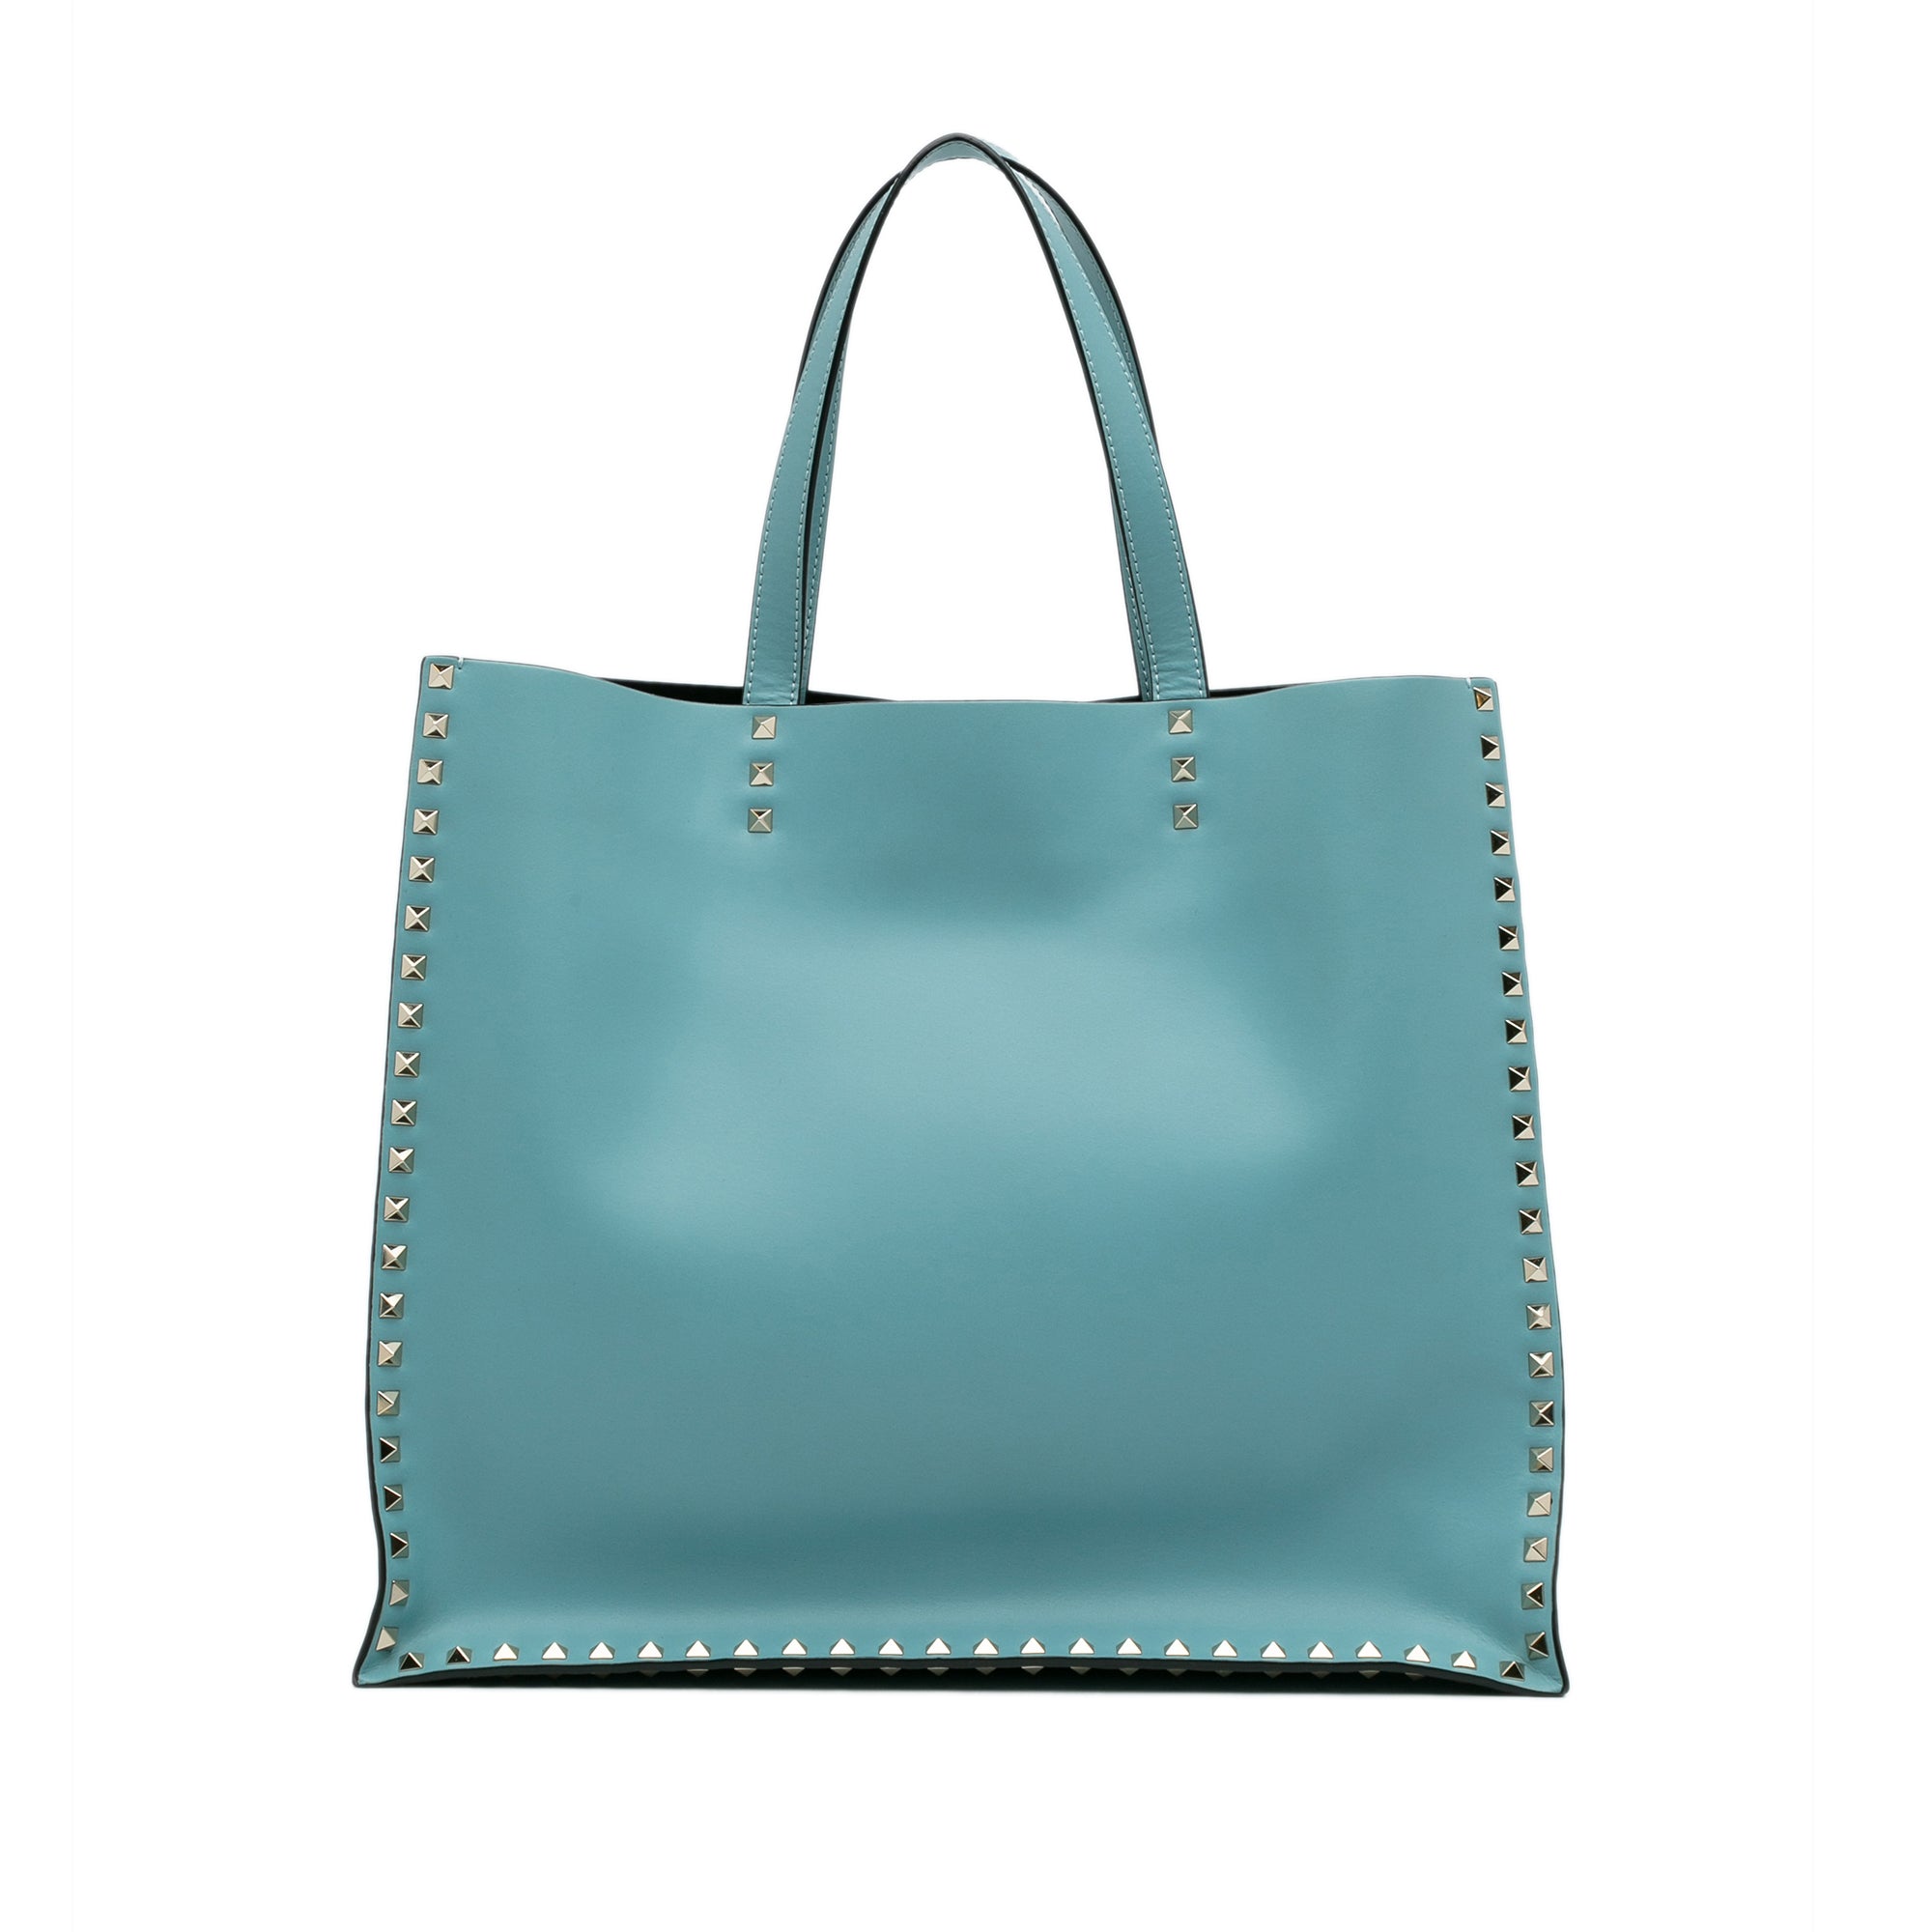 Valentino Rockstud Leather Shopping Tote Bag